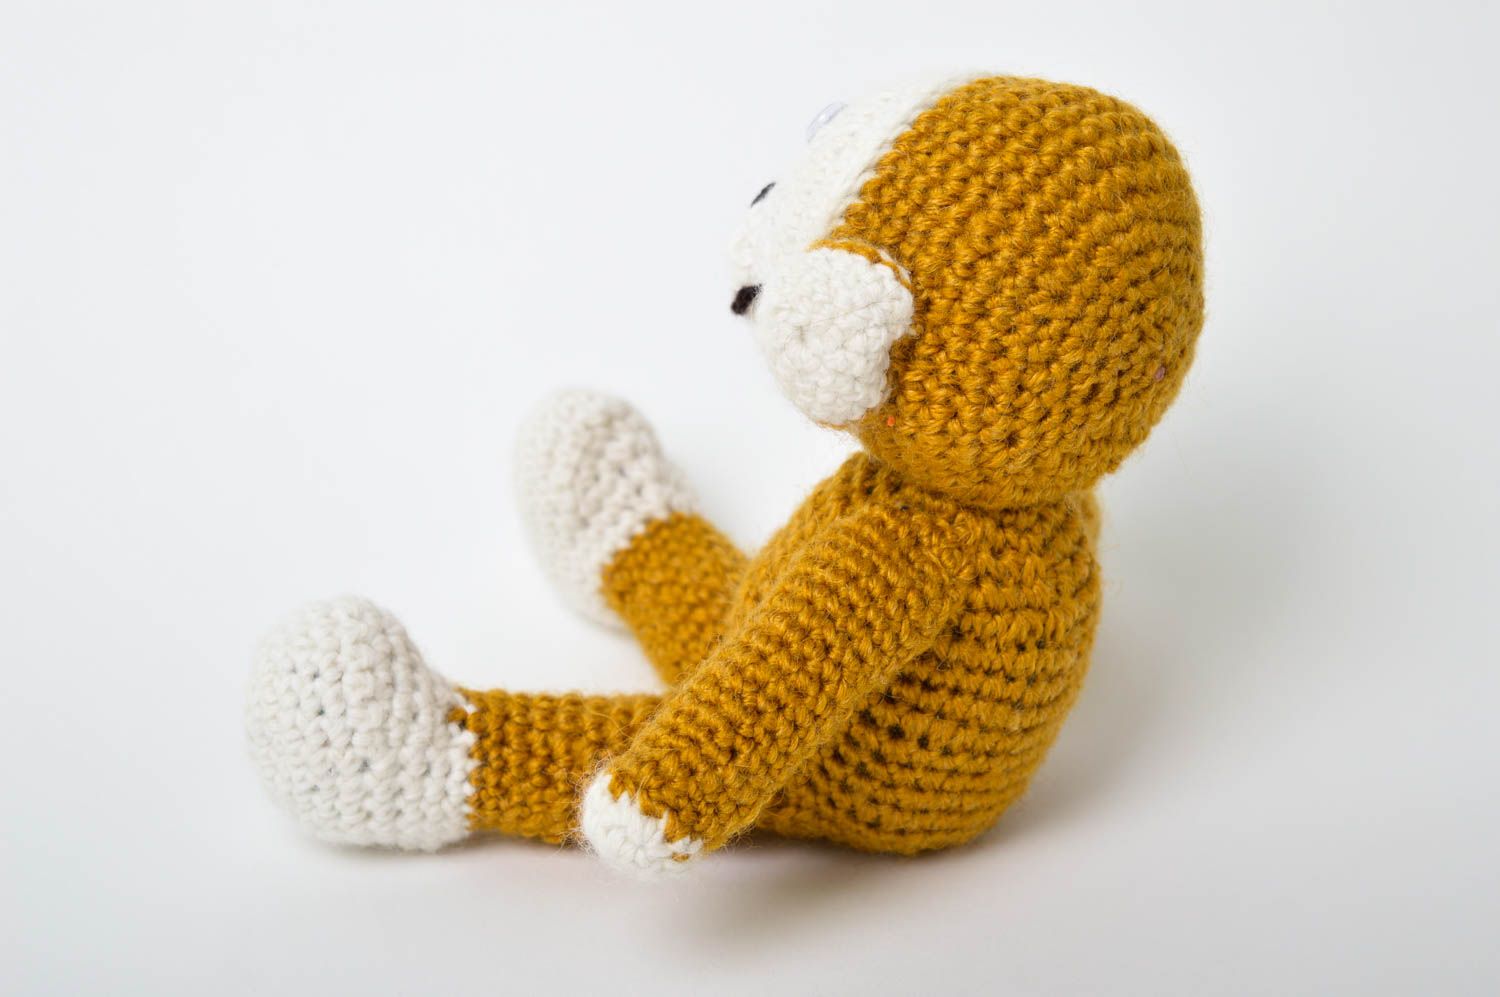 Crocheted handmade soft toy for children stuffed toy for babies interior decor photo 3